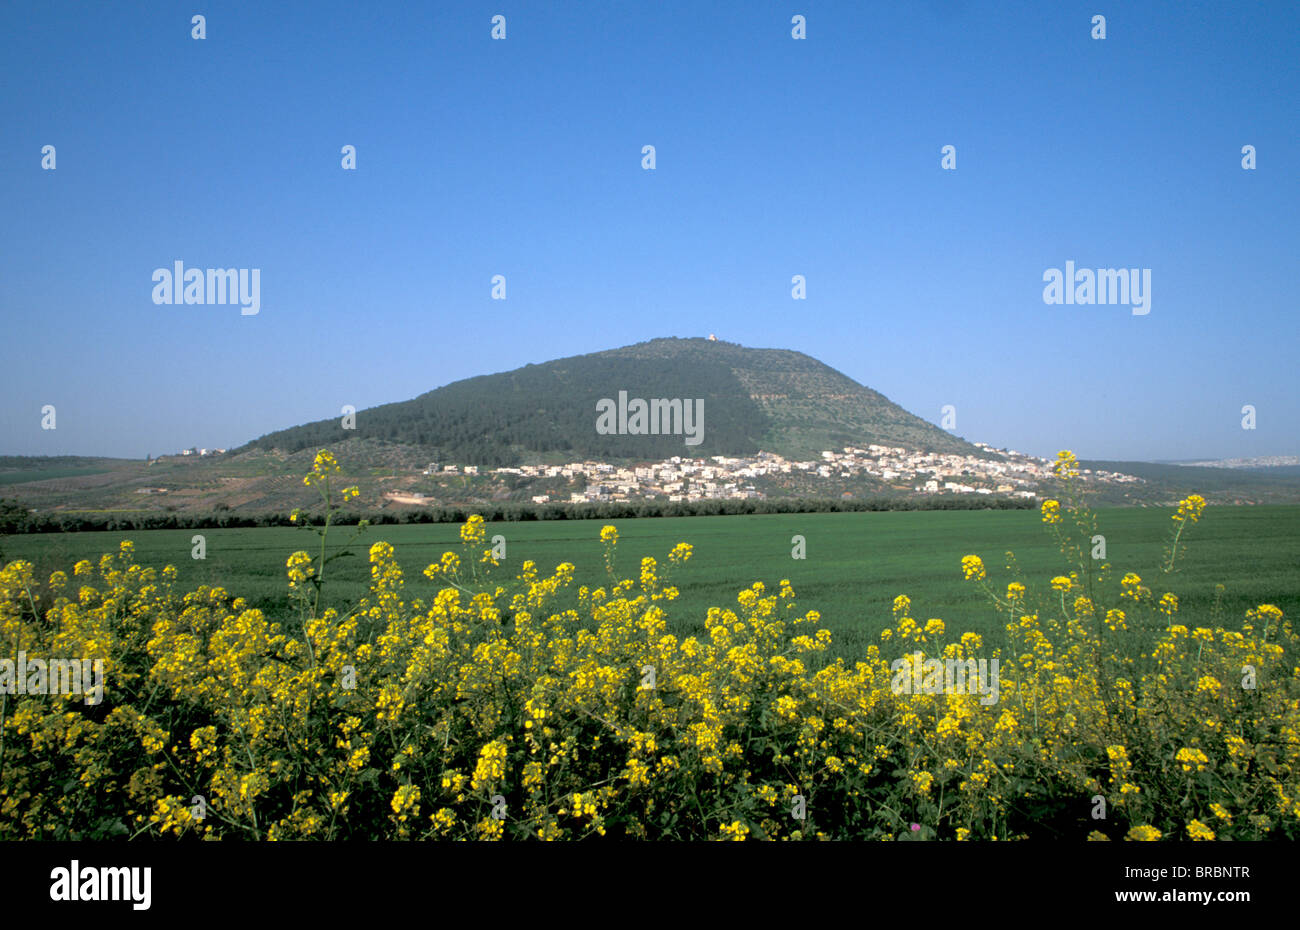 Mount Tabor at the heart of Jezreel valley, Israel Stock Photo